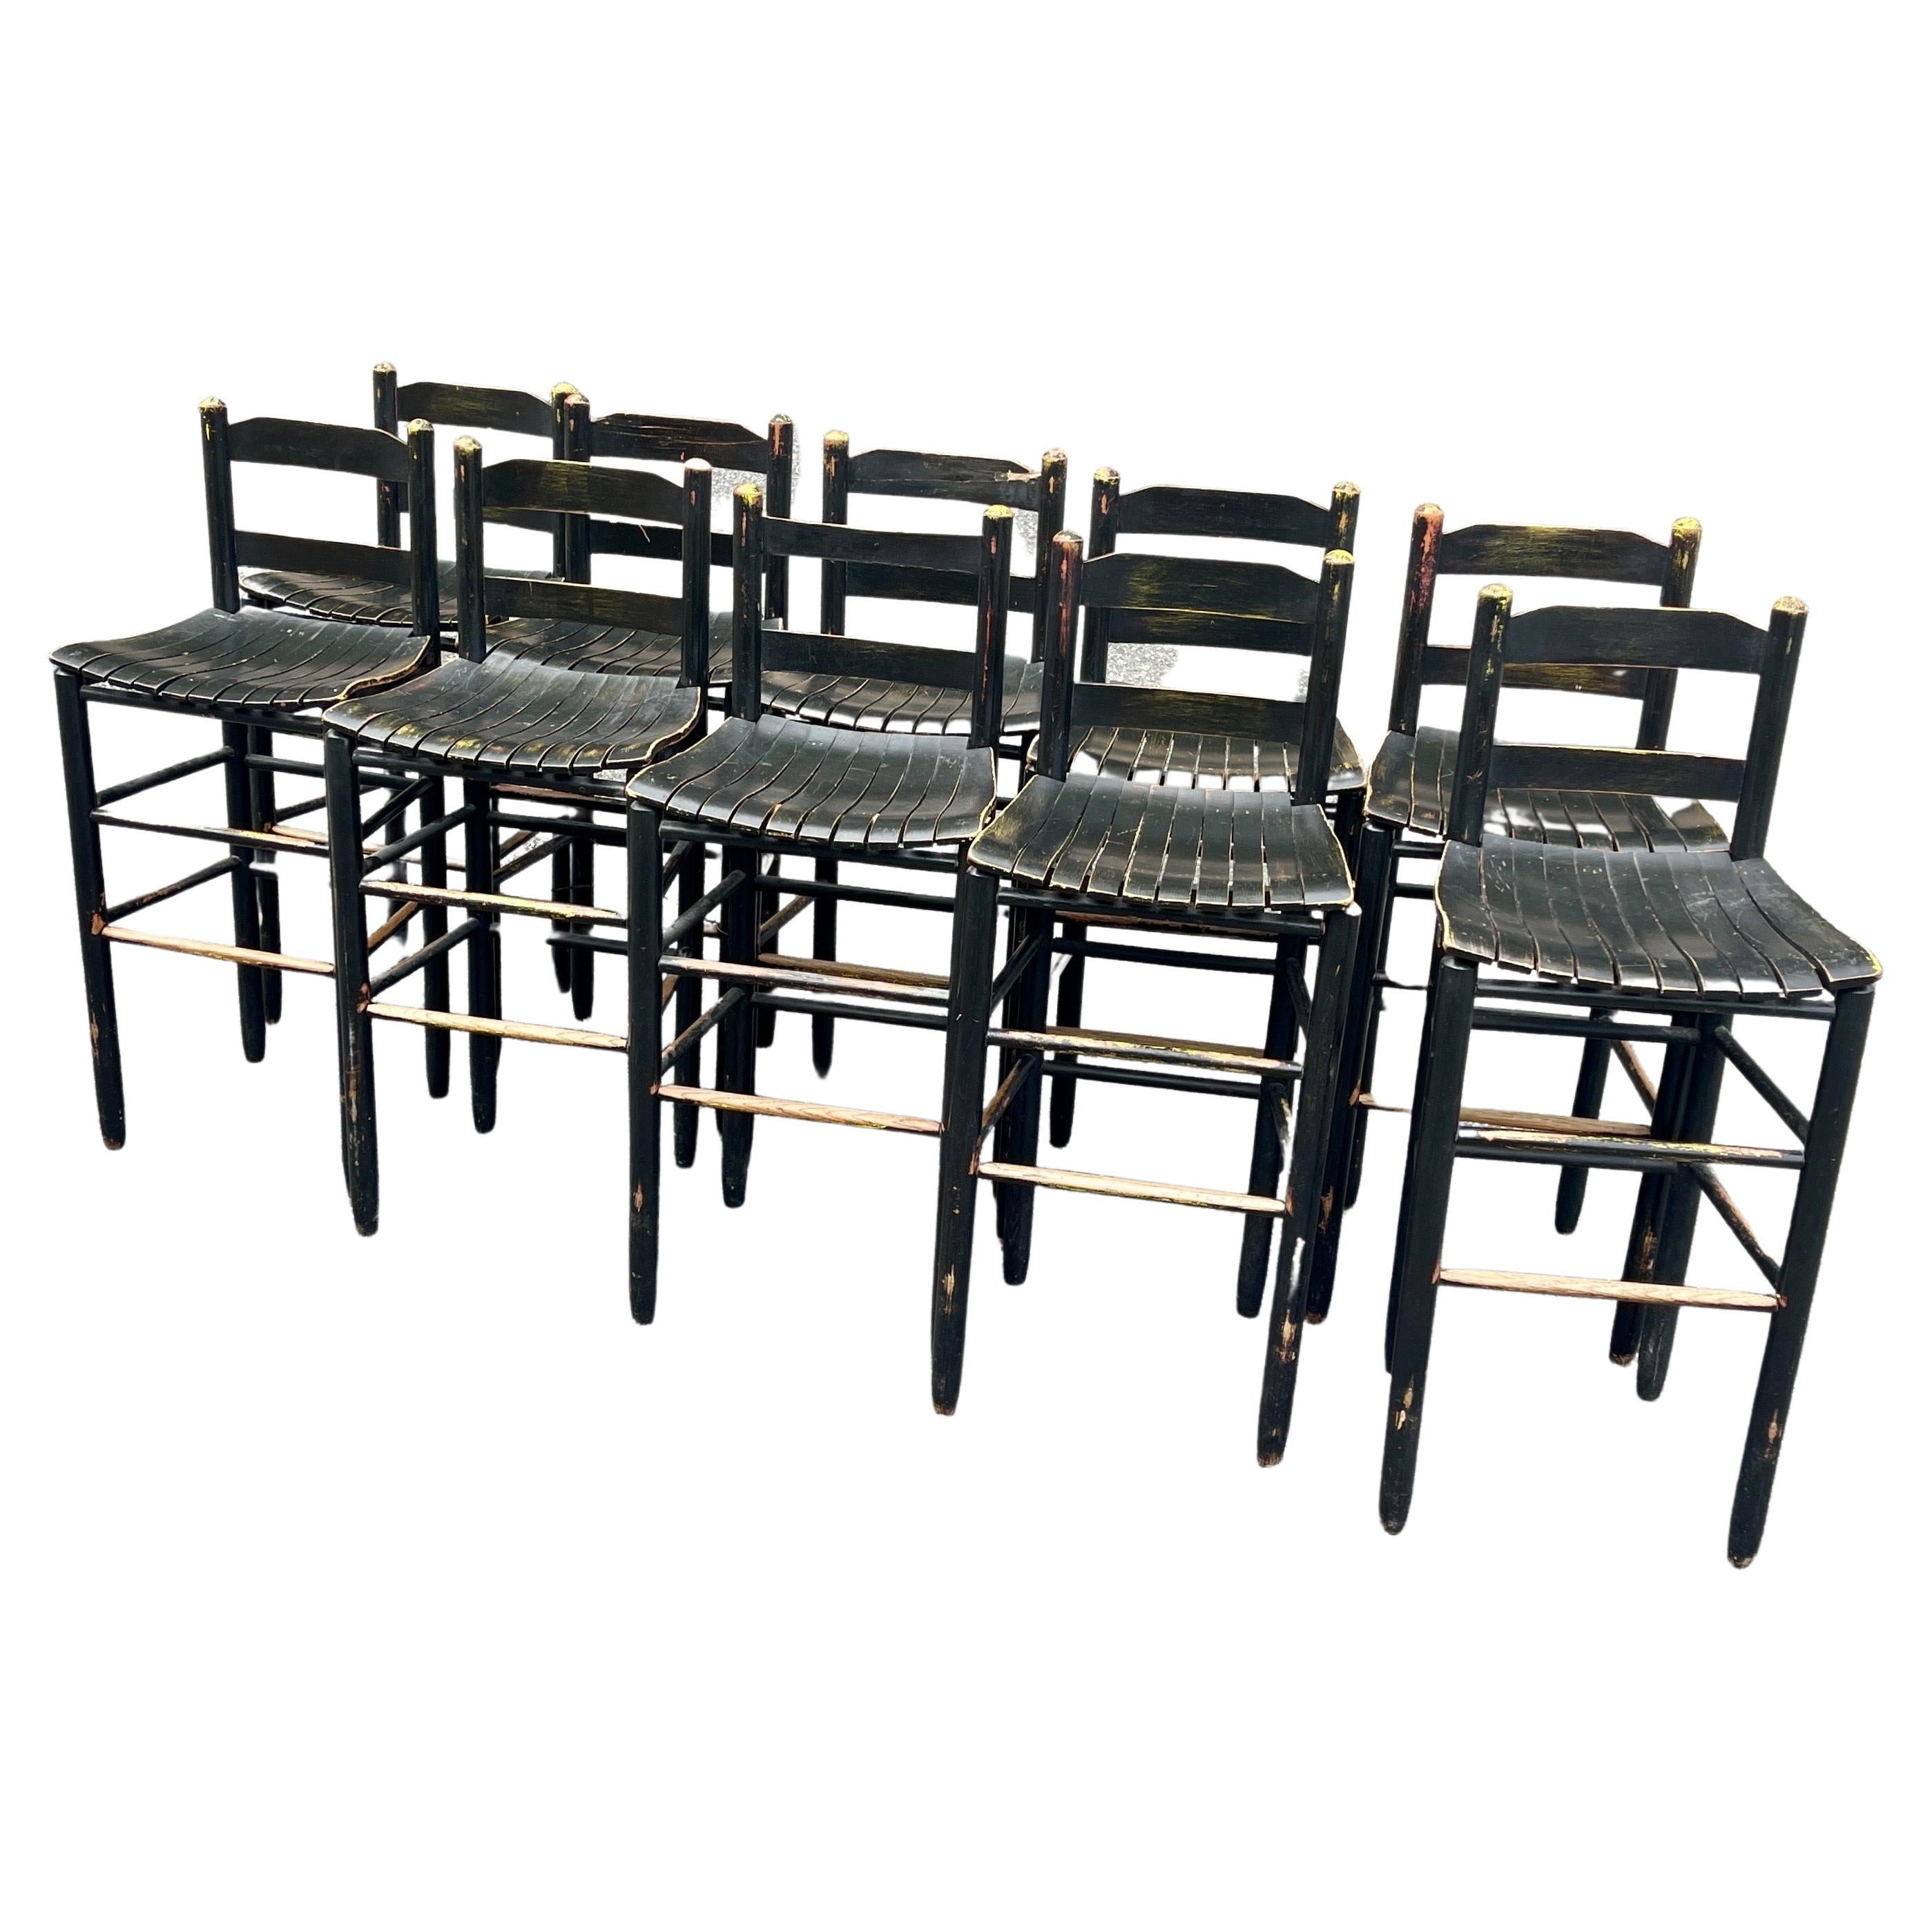 10 Mid-Century Modern Black Painted Bar Stools in Worn Patina Wood.
The stools has signs of an earlier yellow paint that has be overpainted by the current semi-glossy black paint.